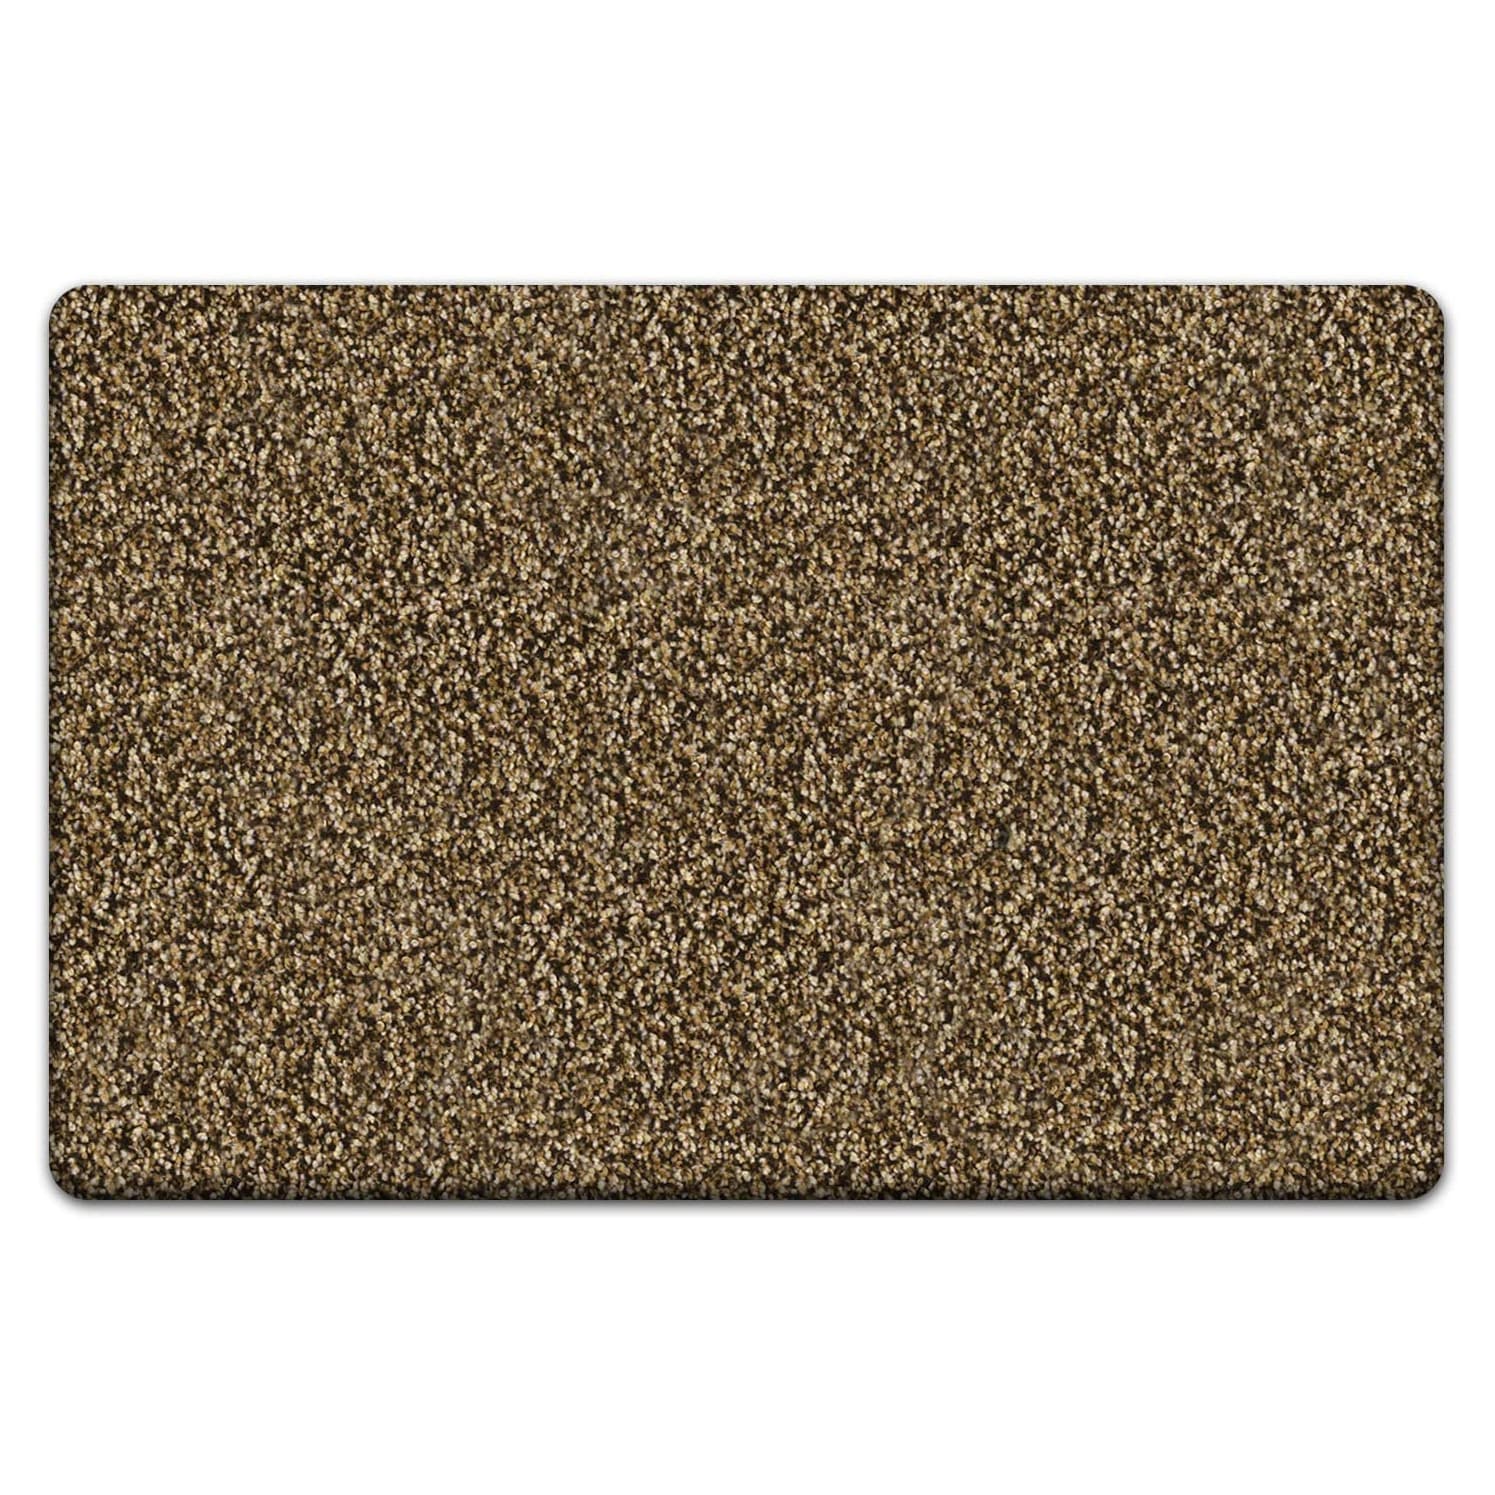 https://ak1.ostkcdn.com/images/products/is/images/direct/cf14c8e6b1ff27349c8cad697c7b68d3af5e12fa/Door-Mat%2C-Entry-Rug%2C-Super-Absorbent%2C-20-X-30.jpg